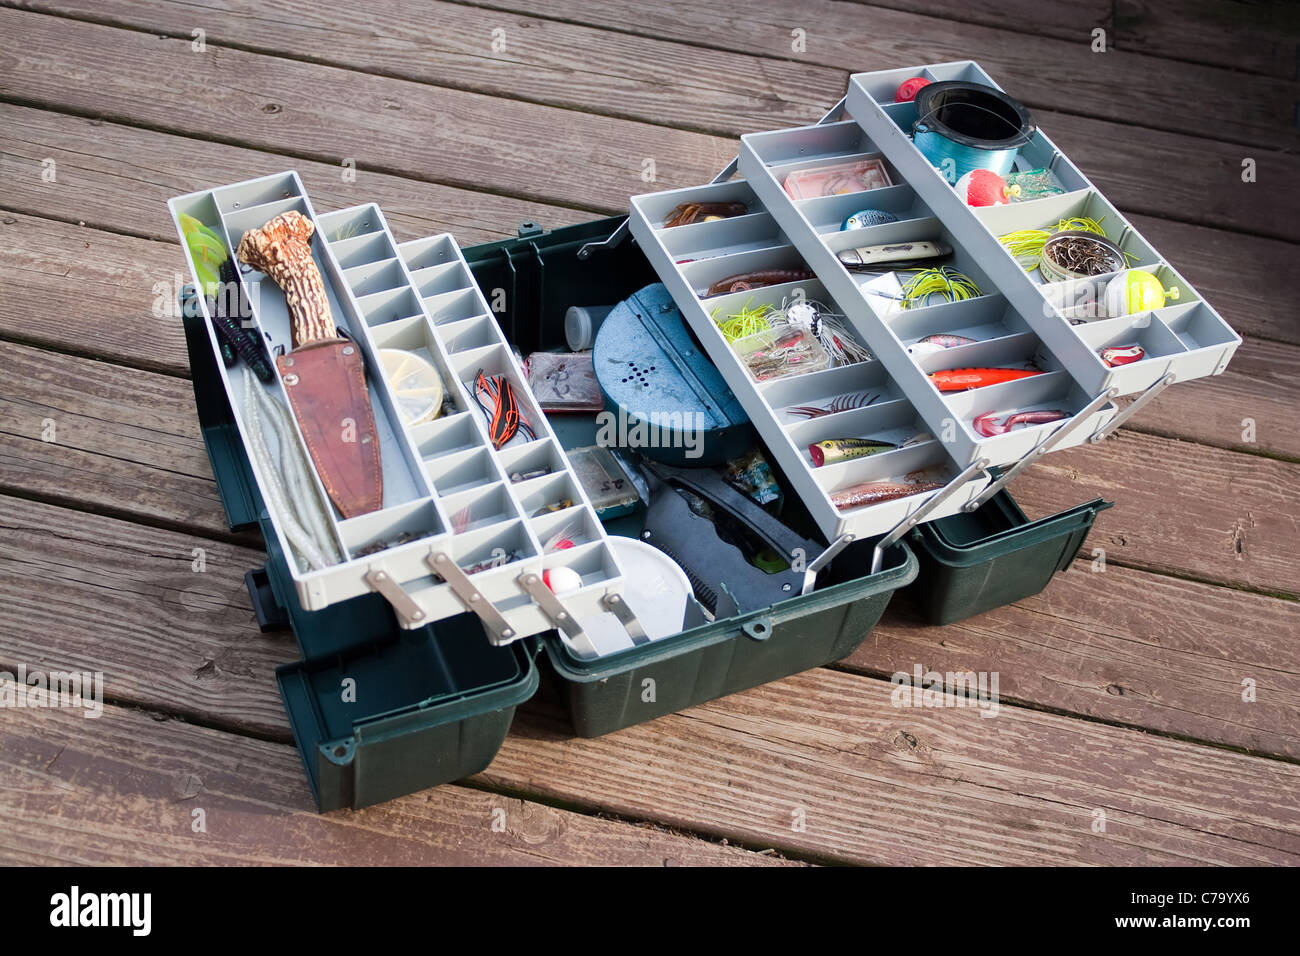 Fisherman S Lures in a Old Tackle Box Stock Image - Image of imitation,  sport: 67670173